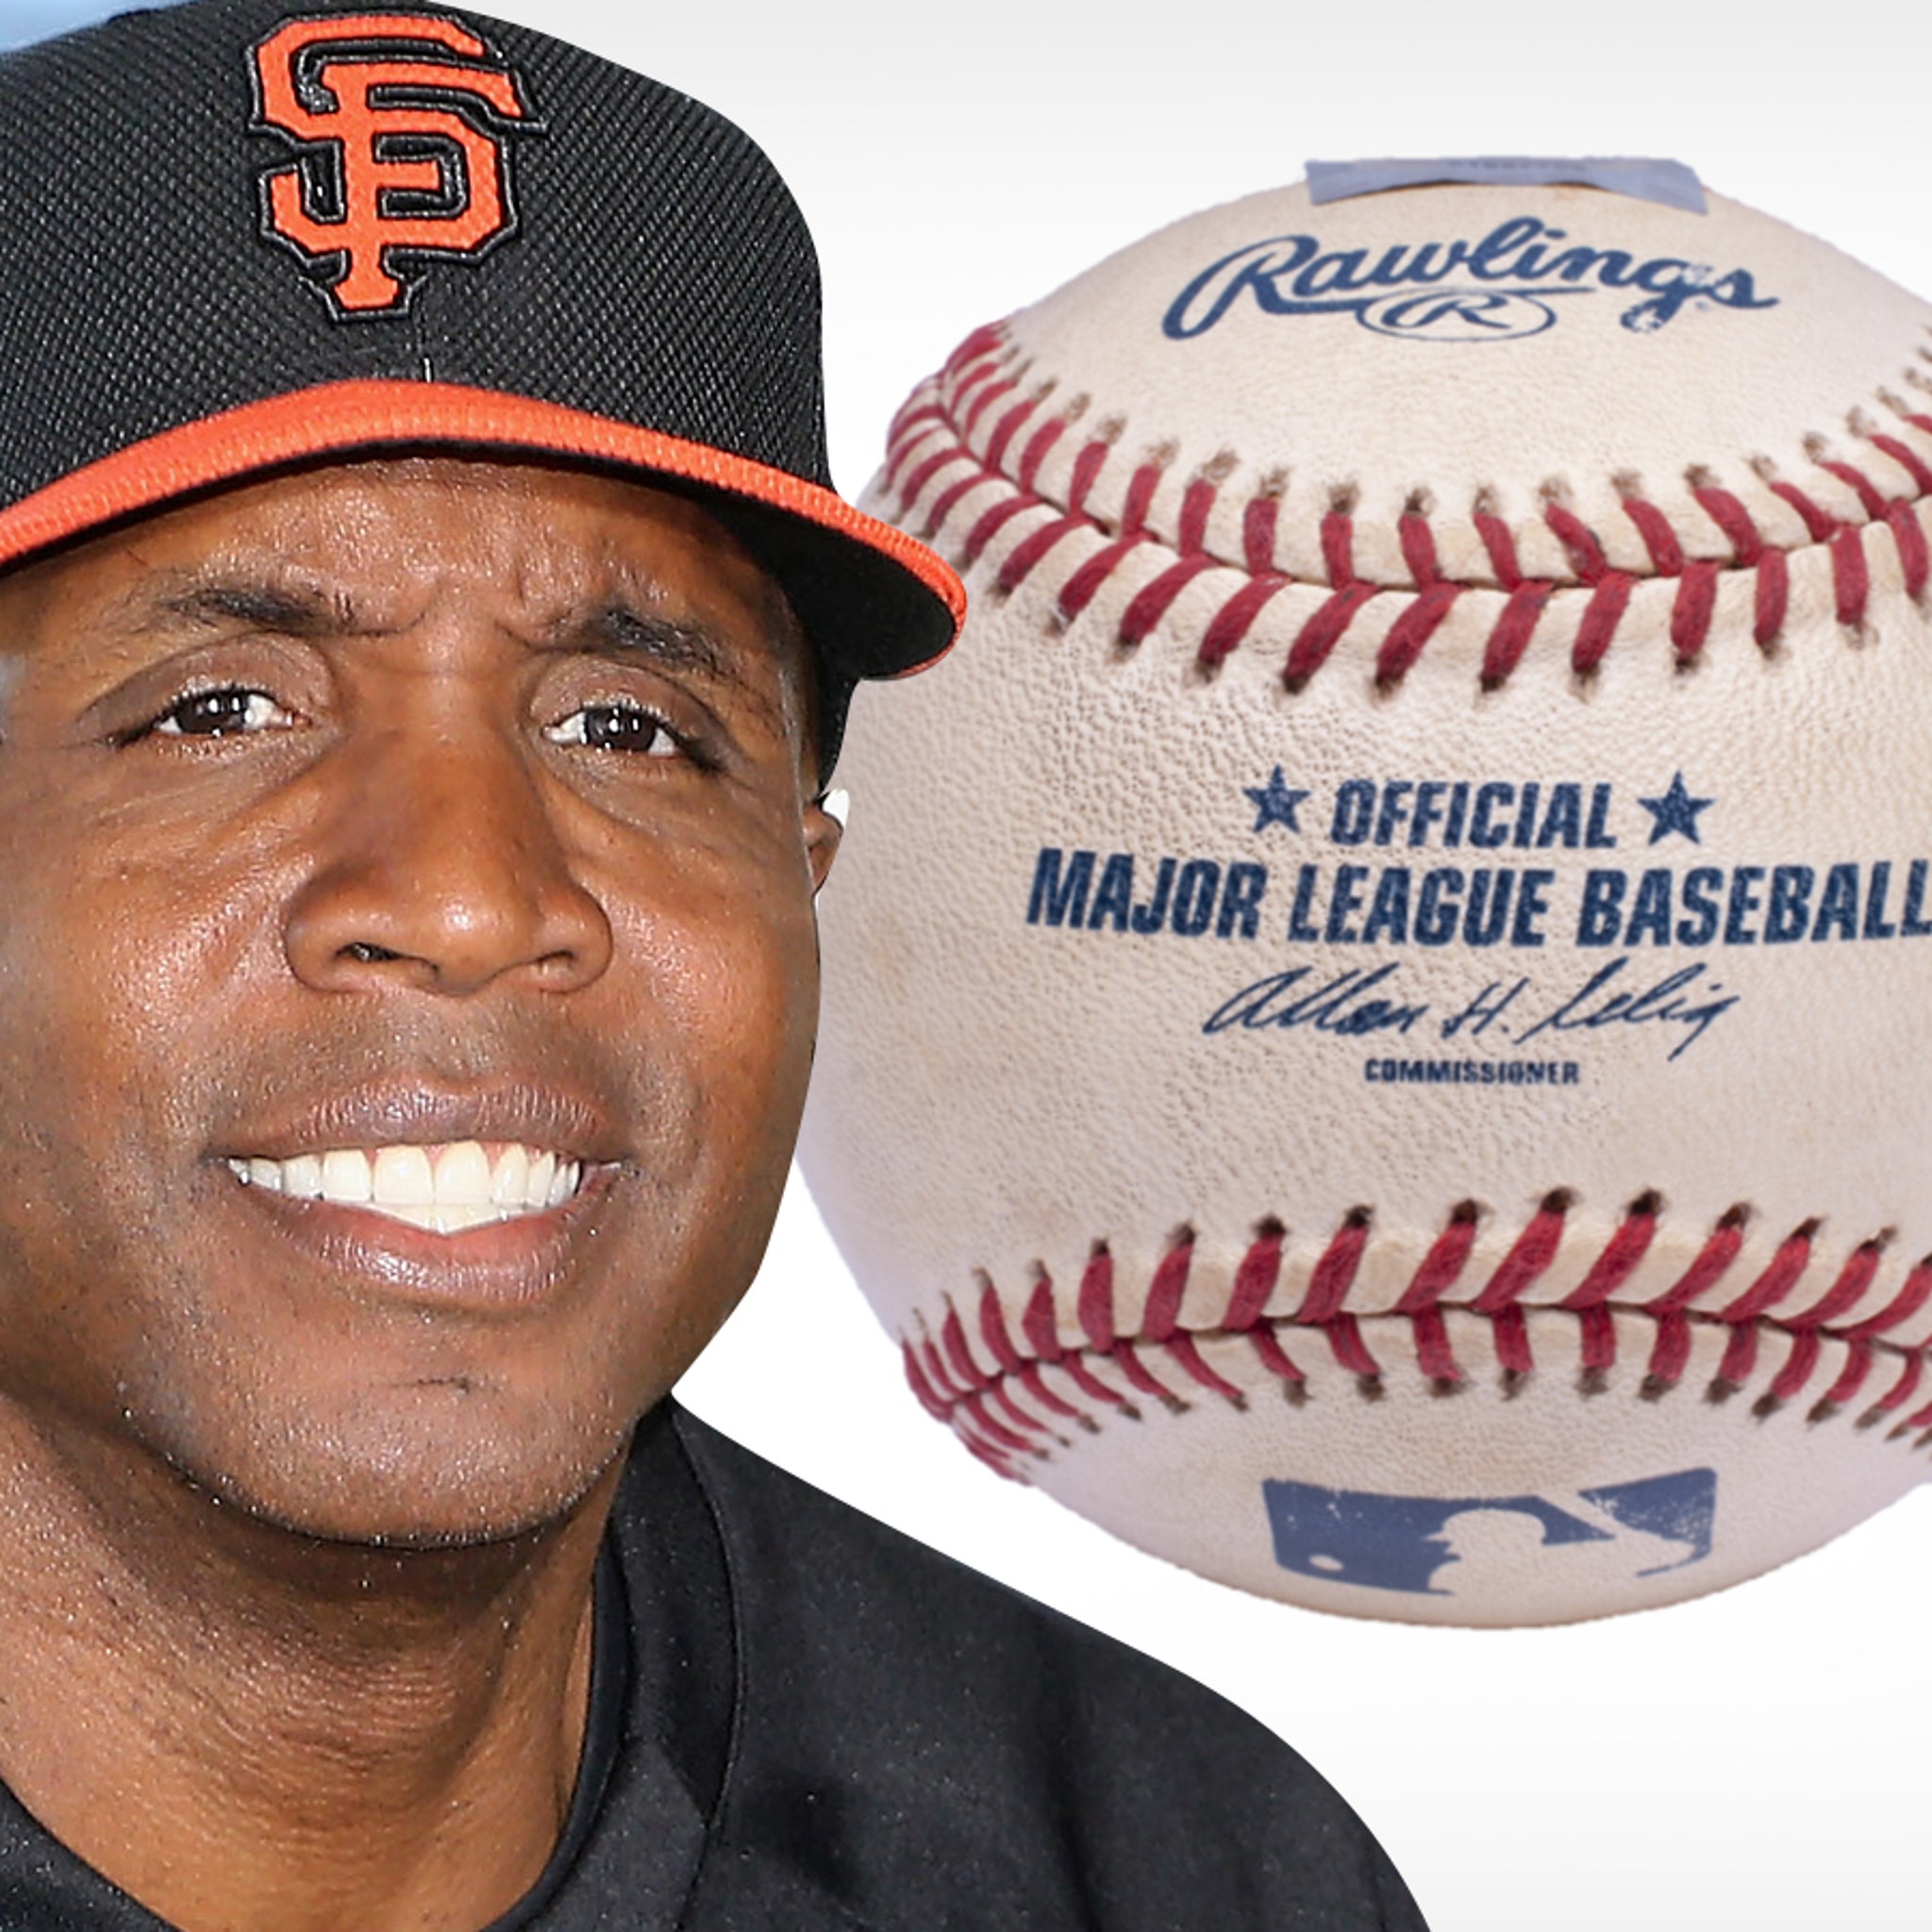 How much is Barry Bonds worth 2021?